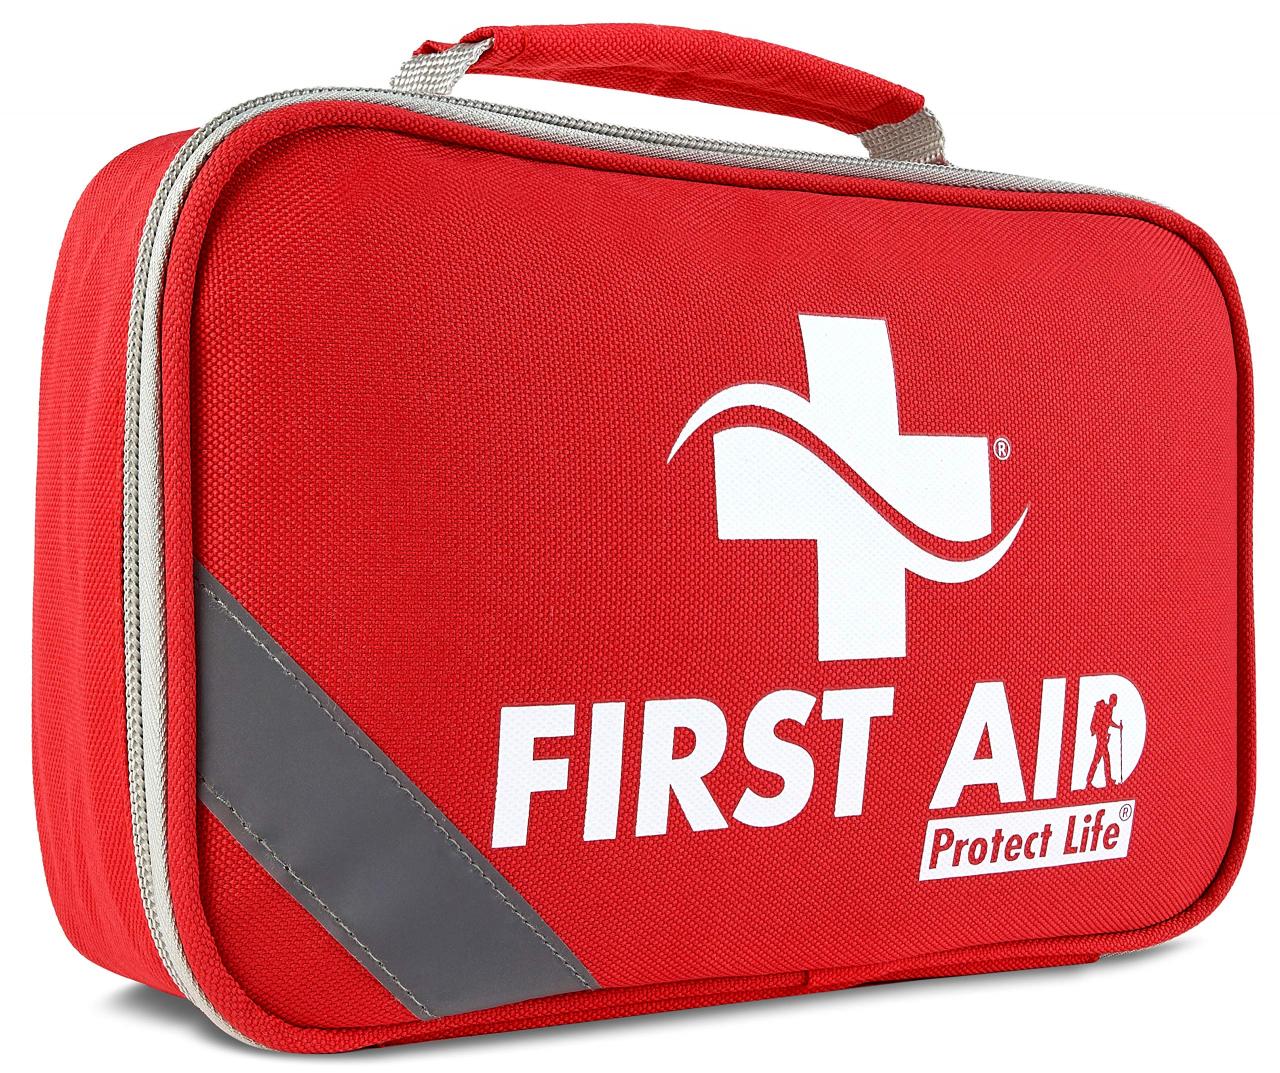 2-in-1 First Aid Kit for Car - 250 Piece - First Aid Kits for Businesses |  Home First Aid Kit, Bonus Mini 1st Aid Kit, Emergency Supplies for Travel,  Workplace & More-